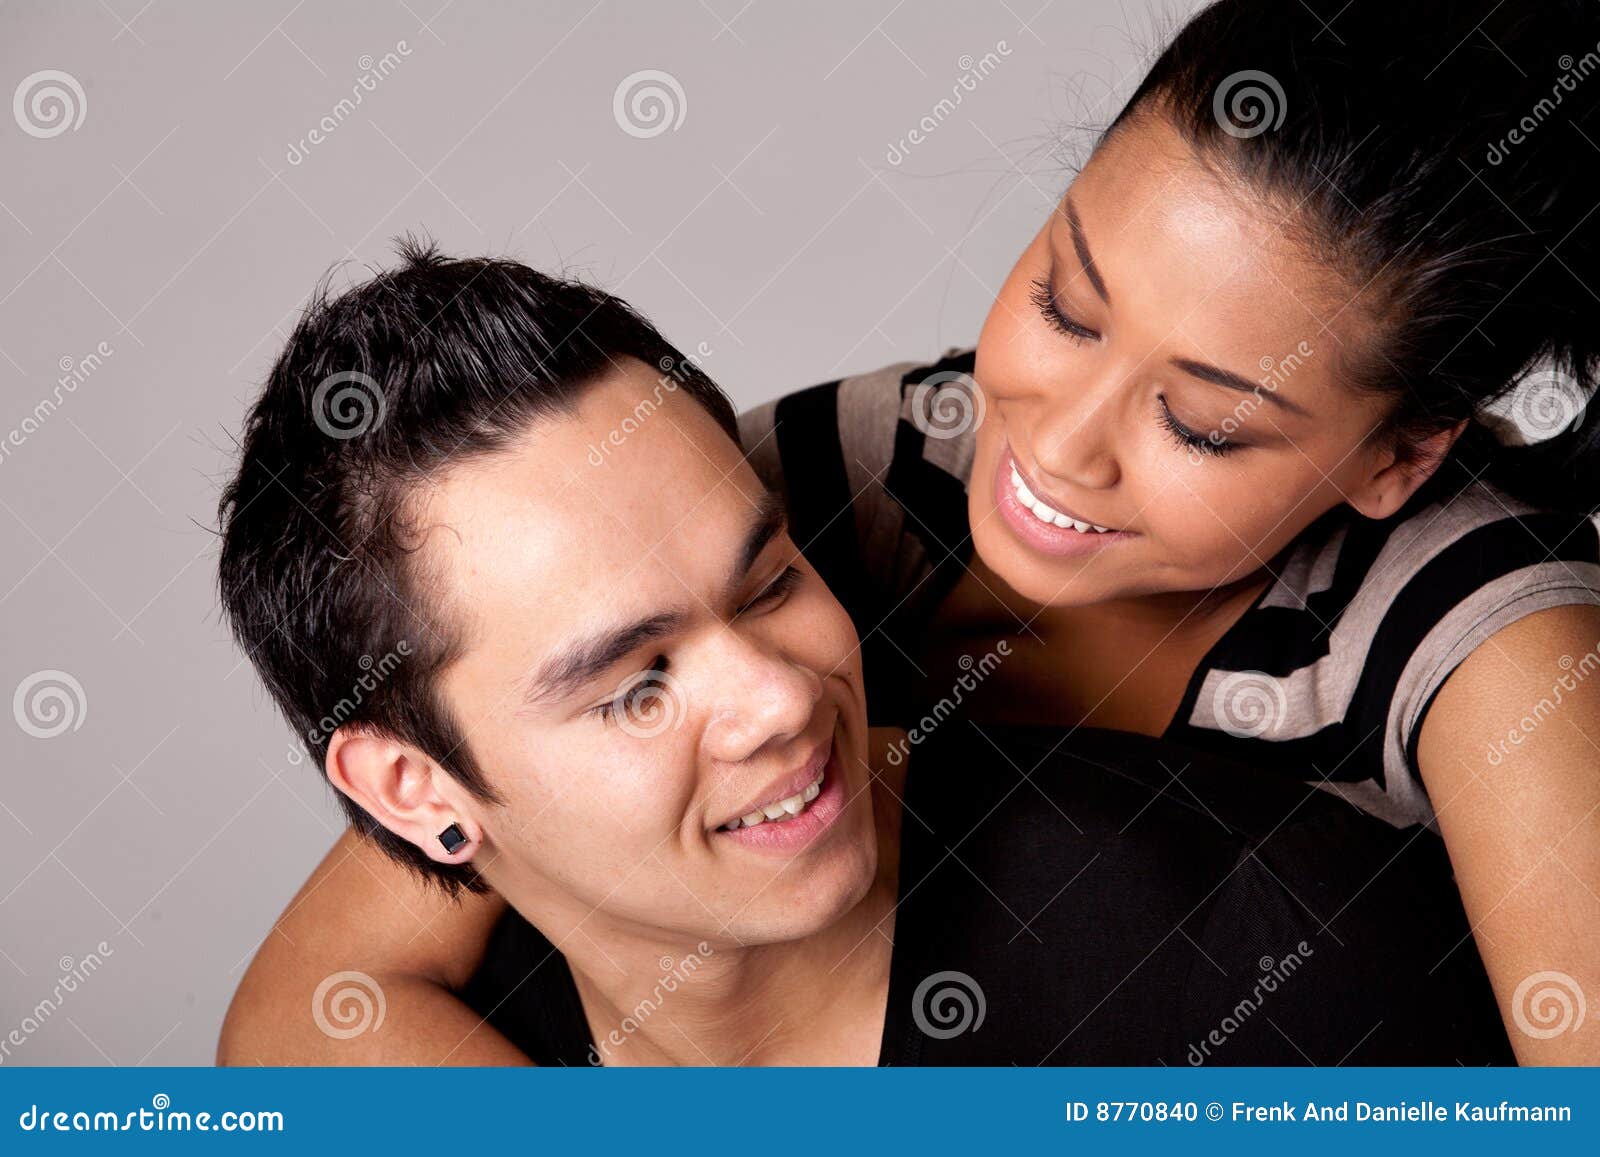 Checking Out My Indonesian Lover with a Smile Stock Photo